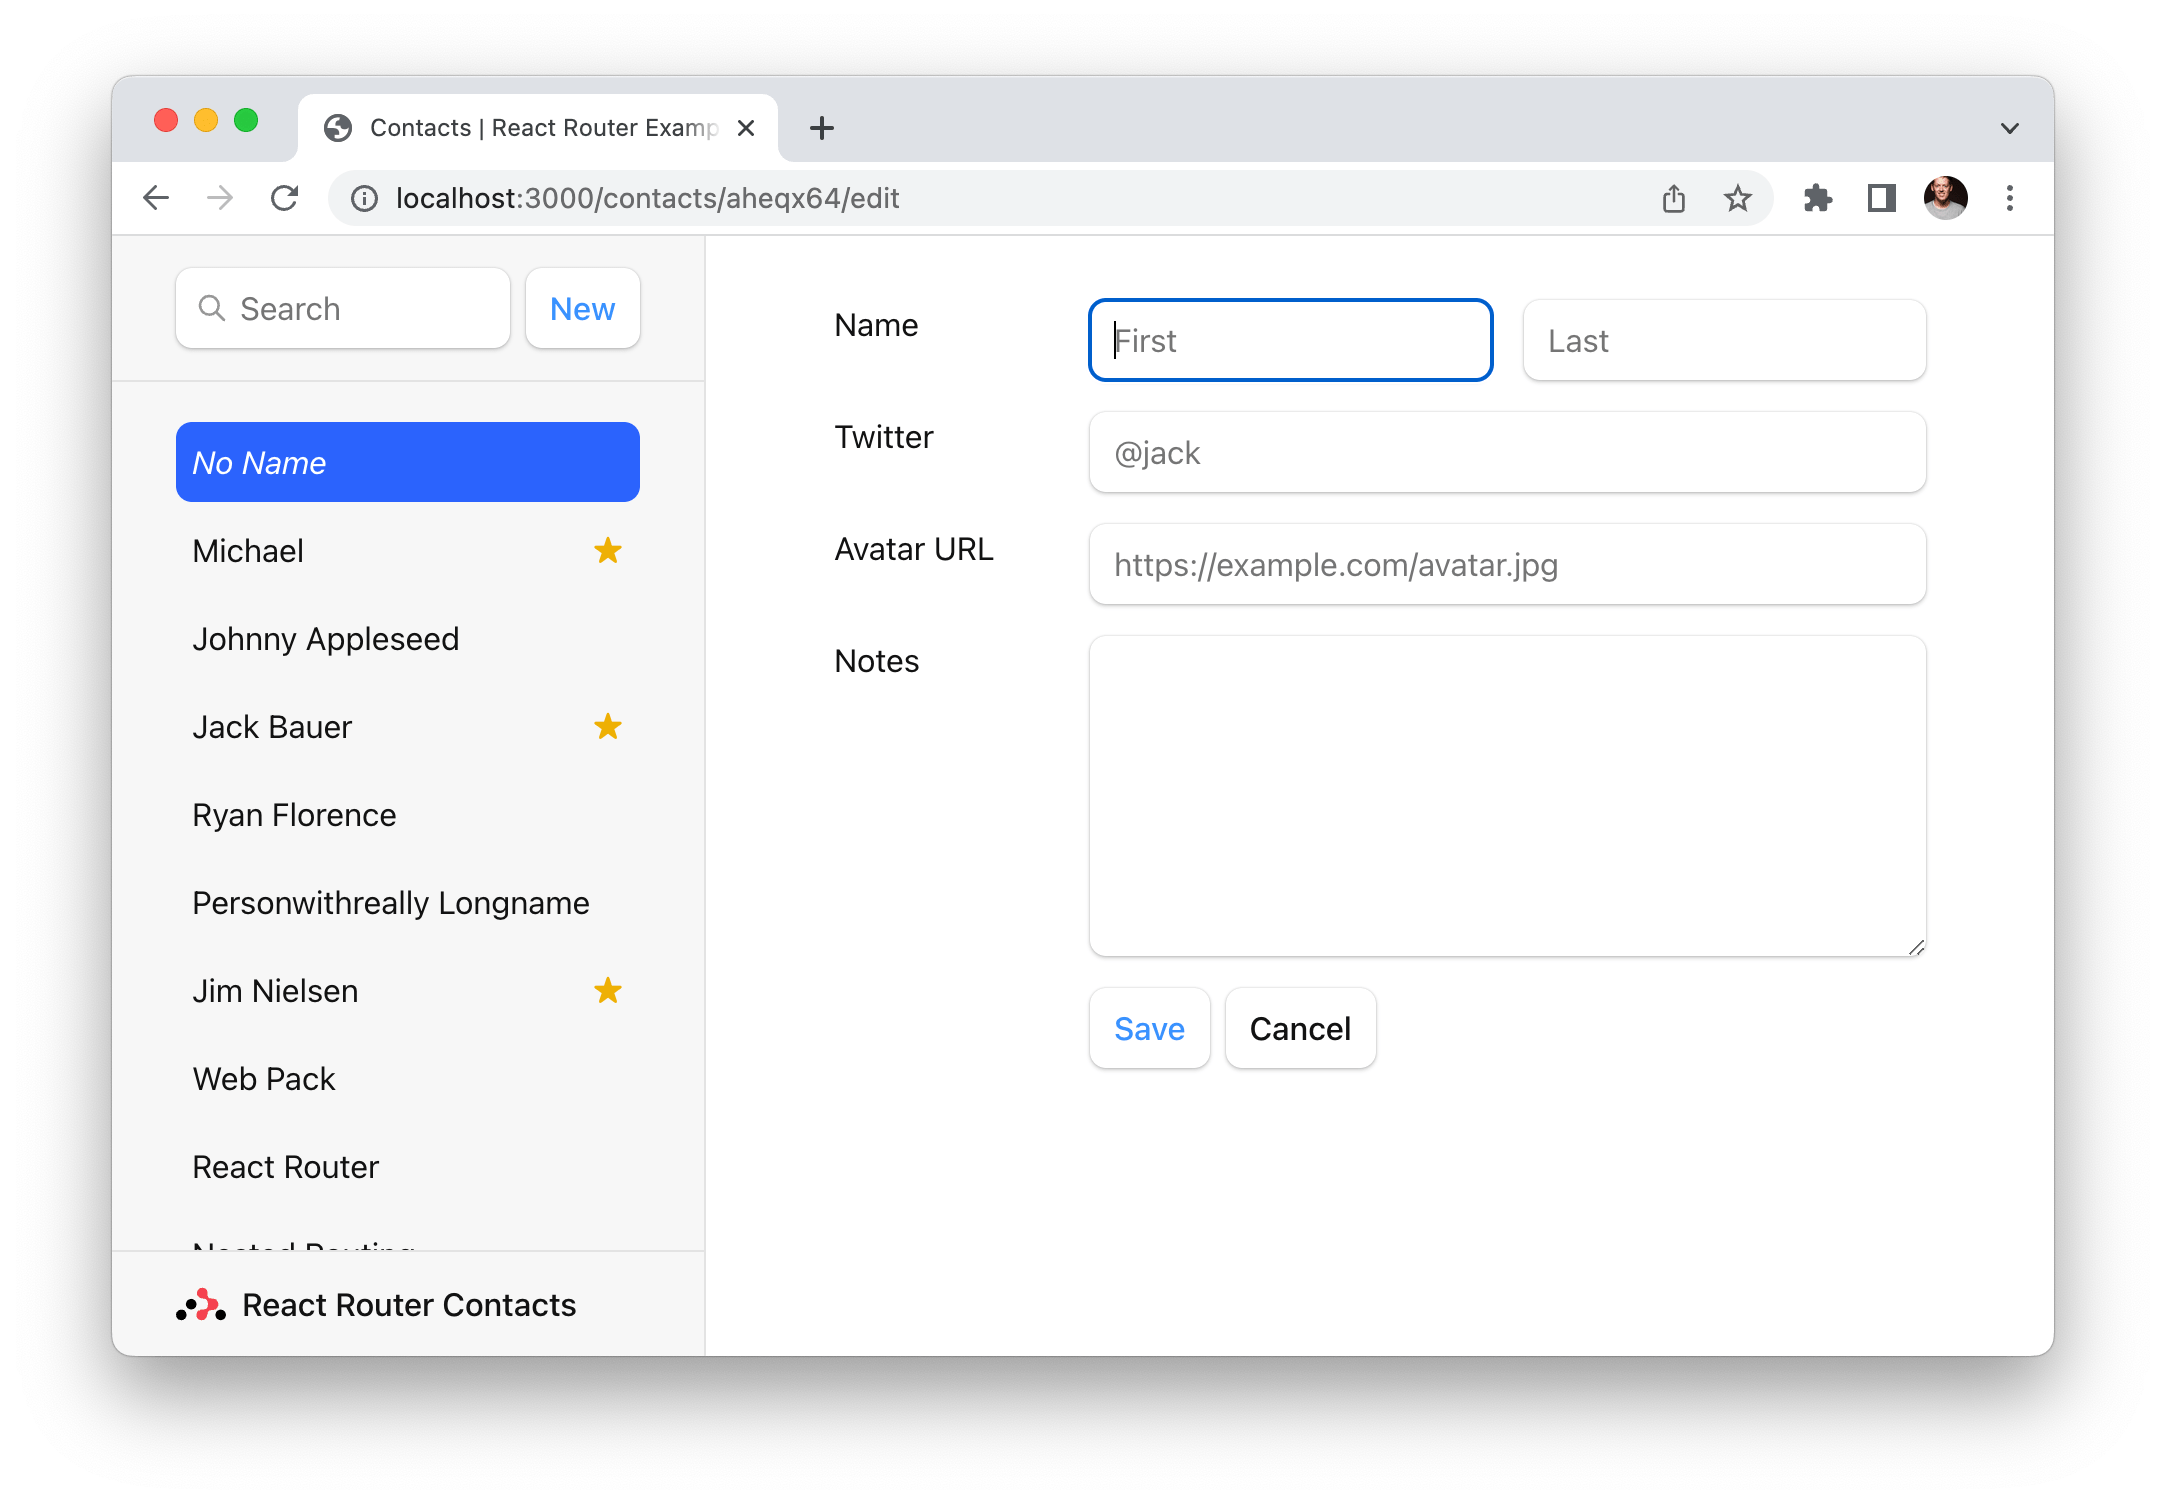 Screenshot of the new contact page in the “Contacts” demo app for React Router.